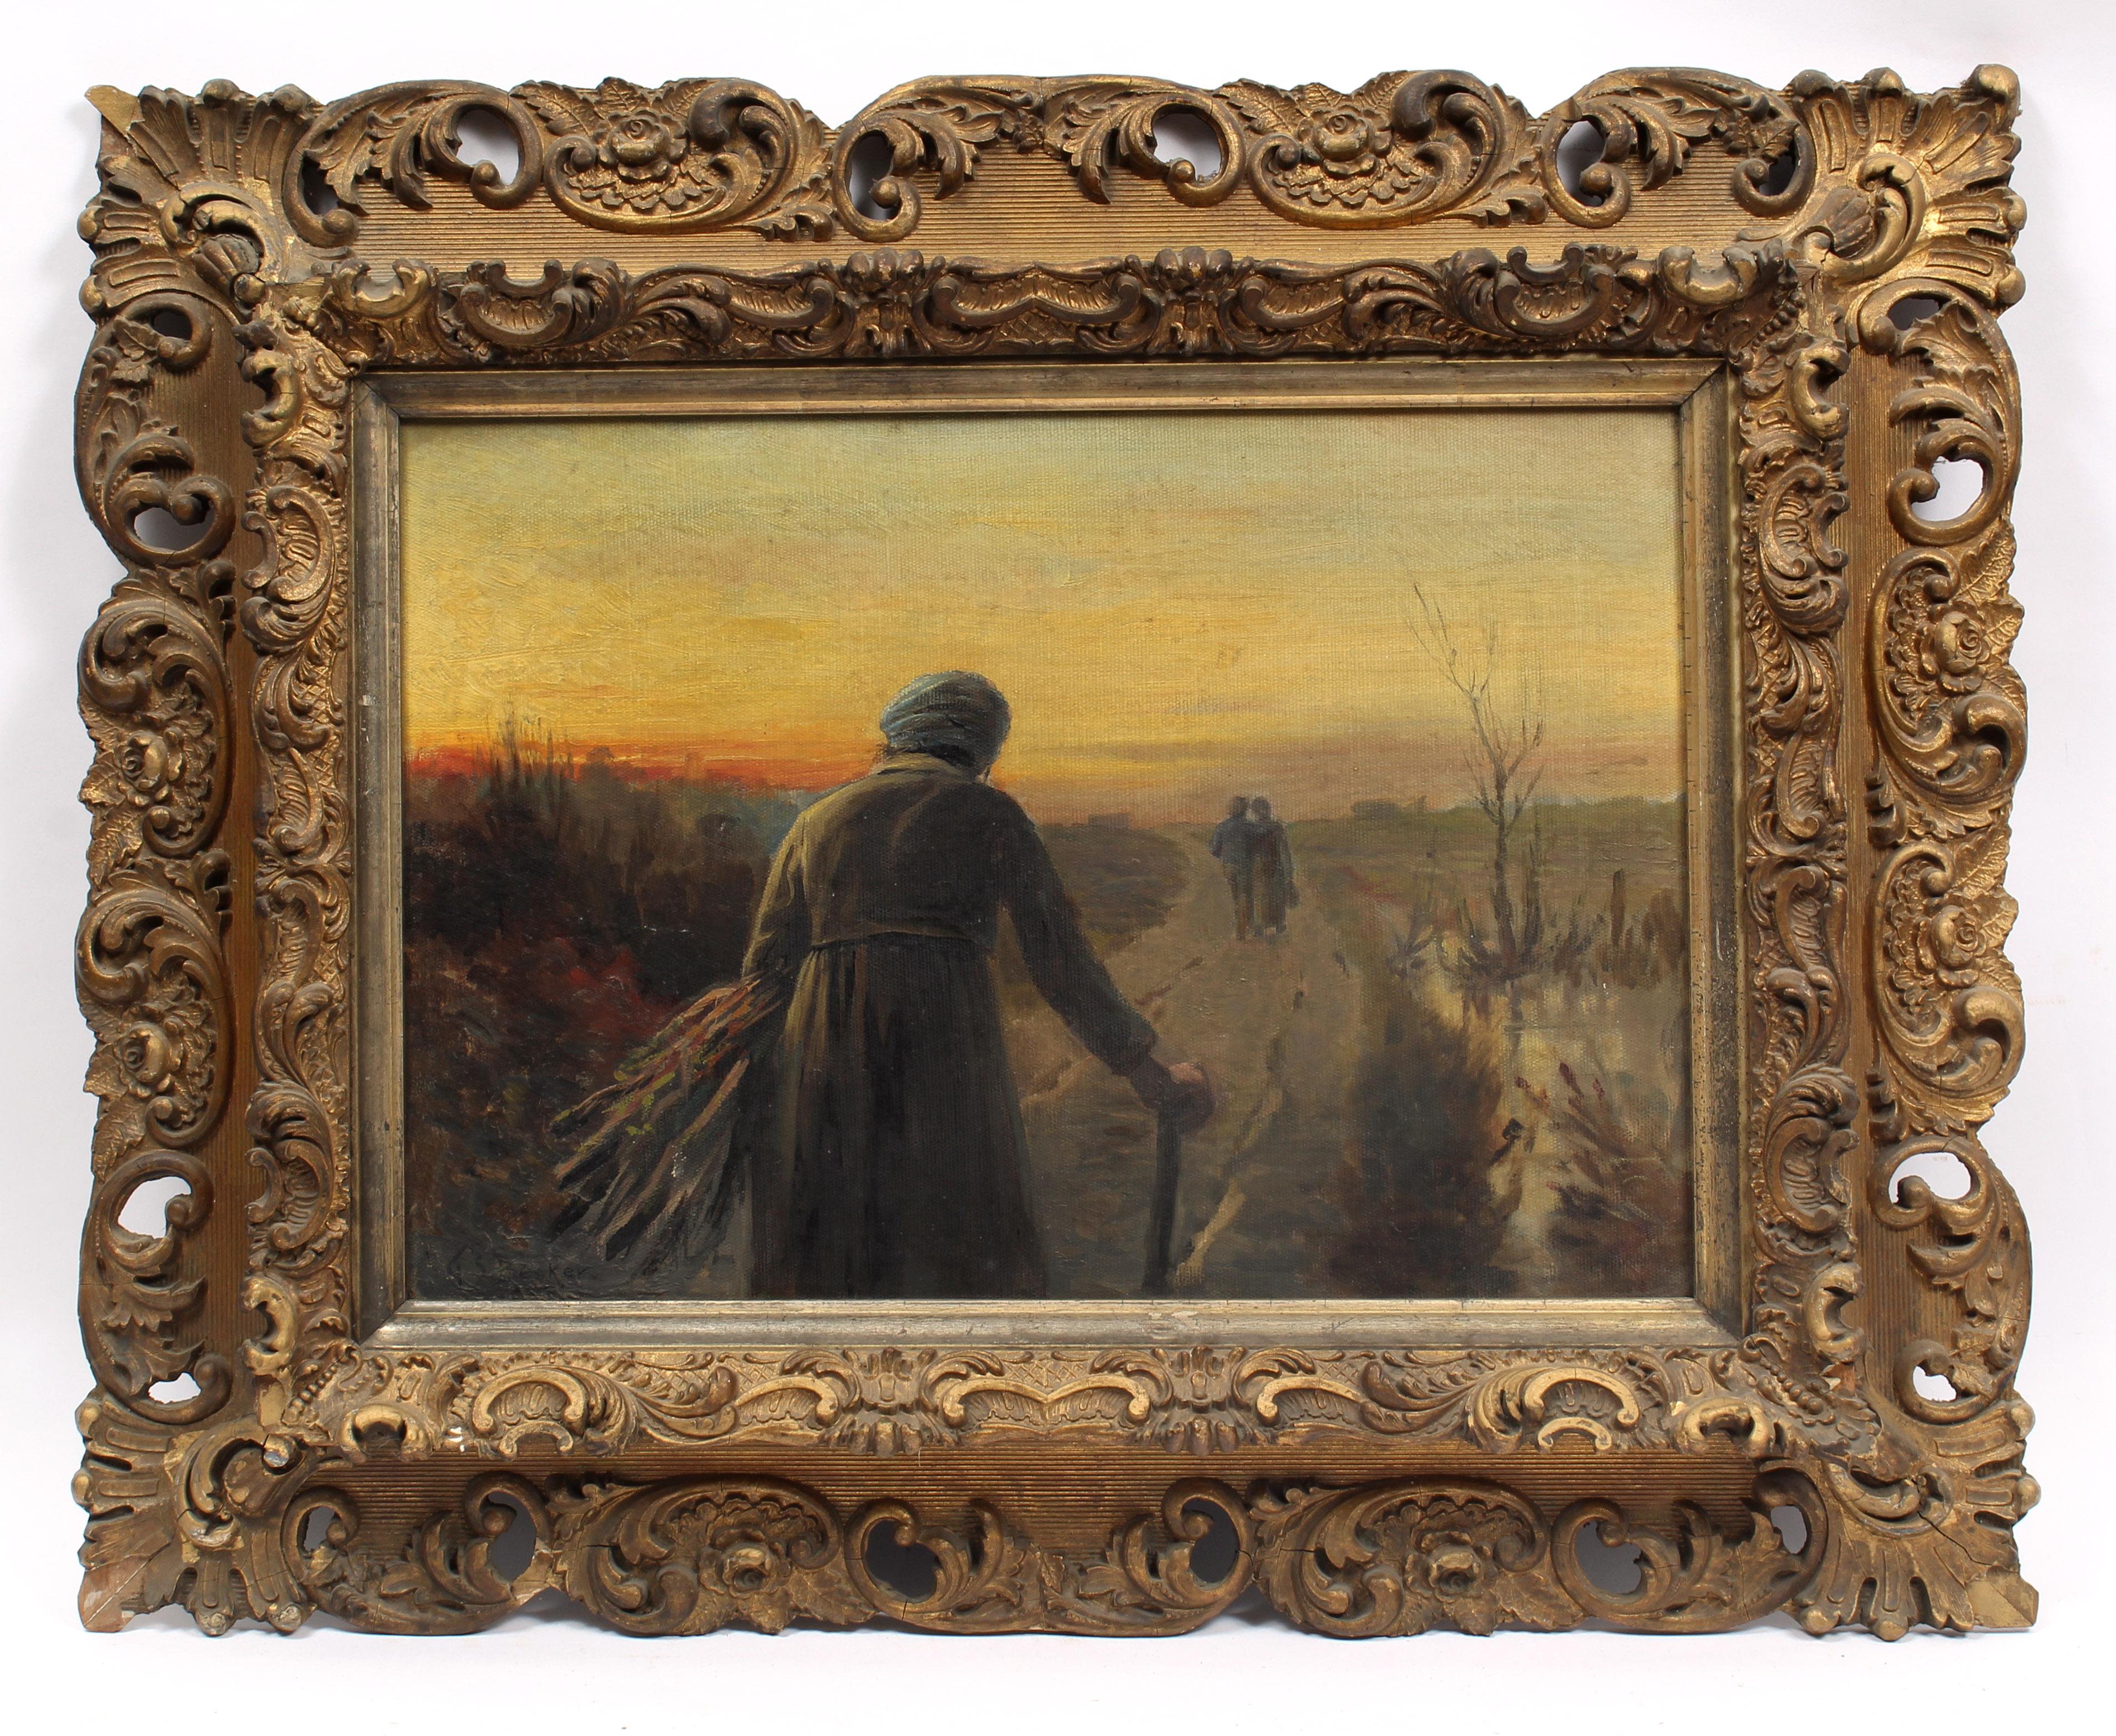 Unknown Figurative Painting - Tonalist Painting Sunset Figures Wheat Barbizon Framed 19th Century Oil Painting